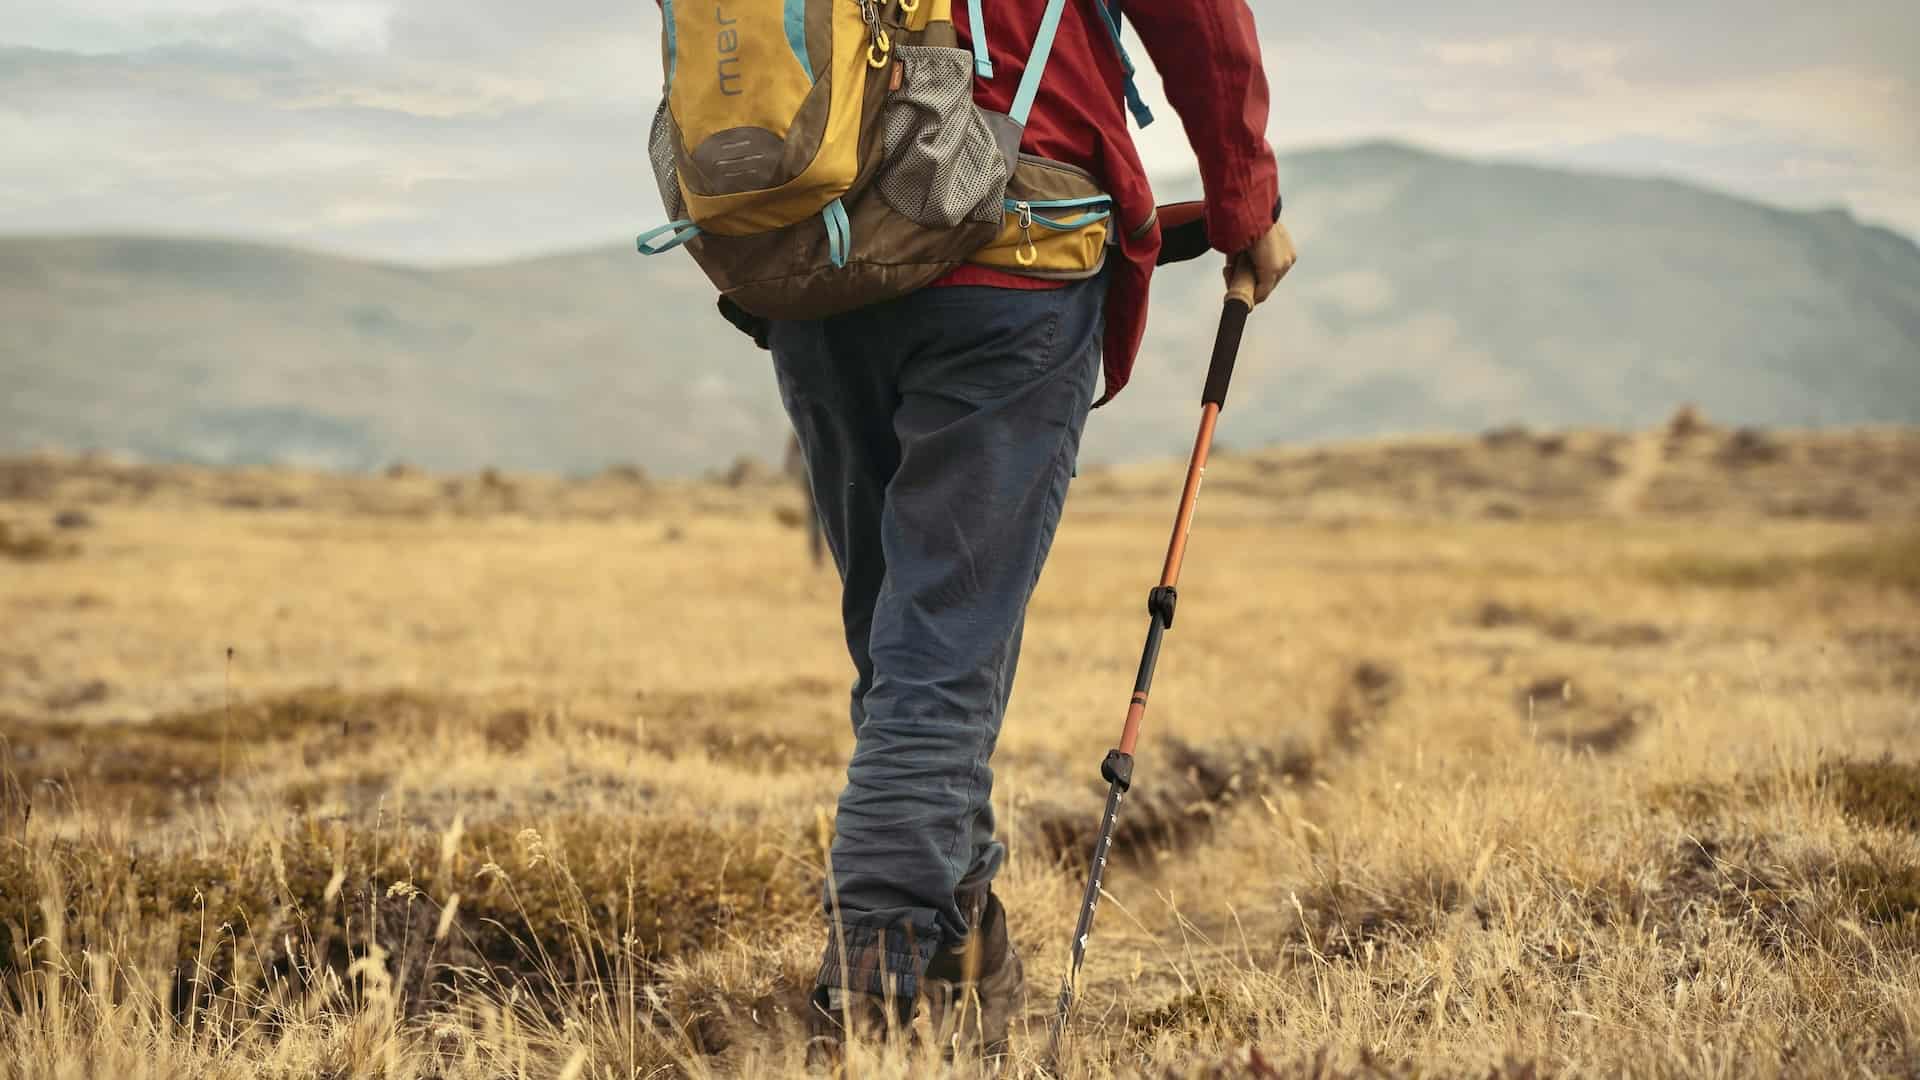 Trekking Essentials for Beginners to Prepare for Your Adventure